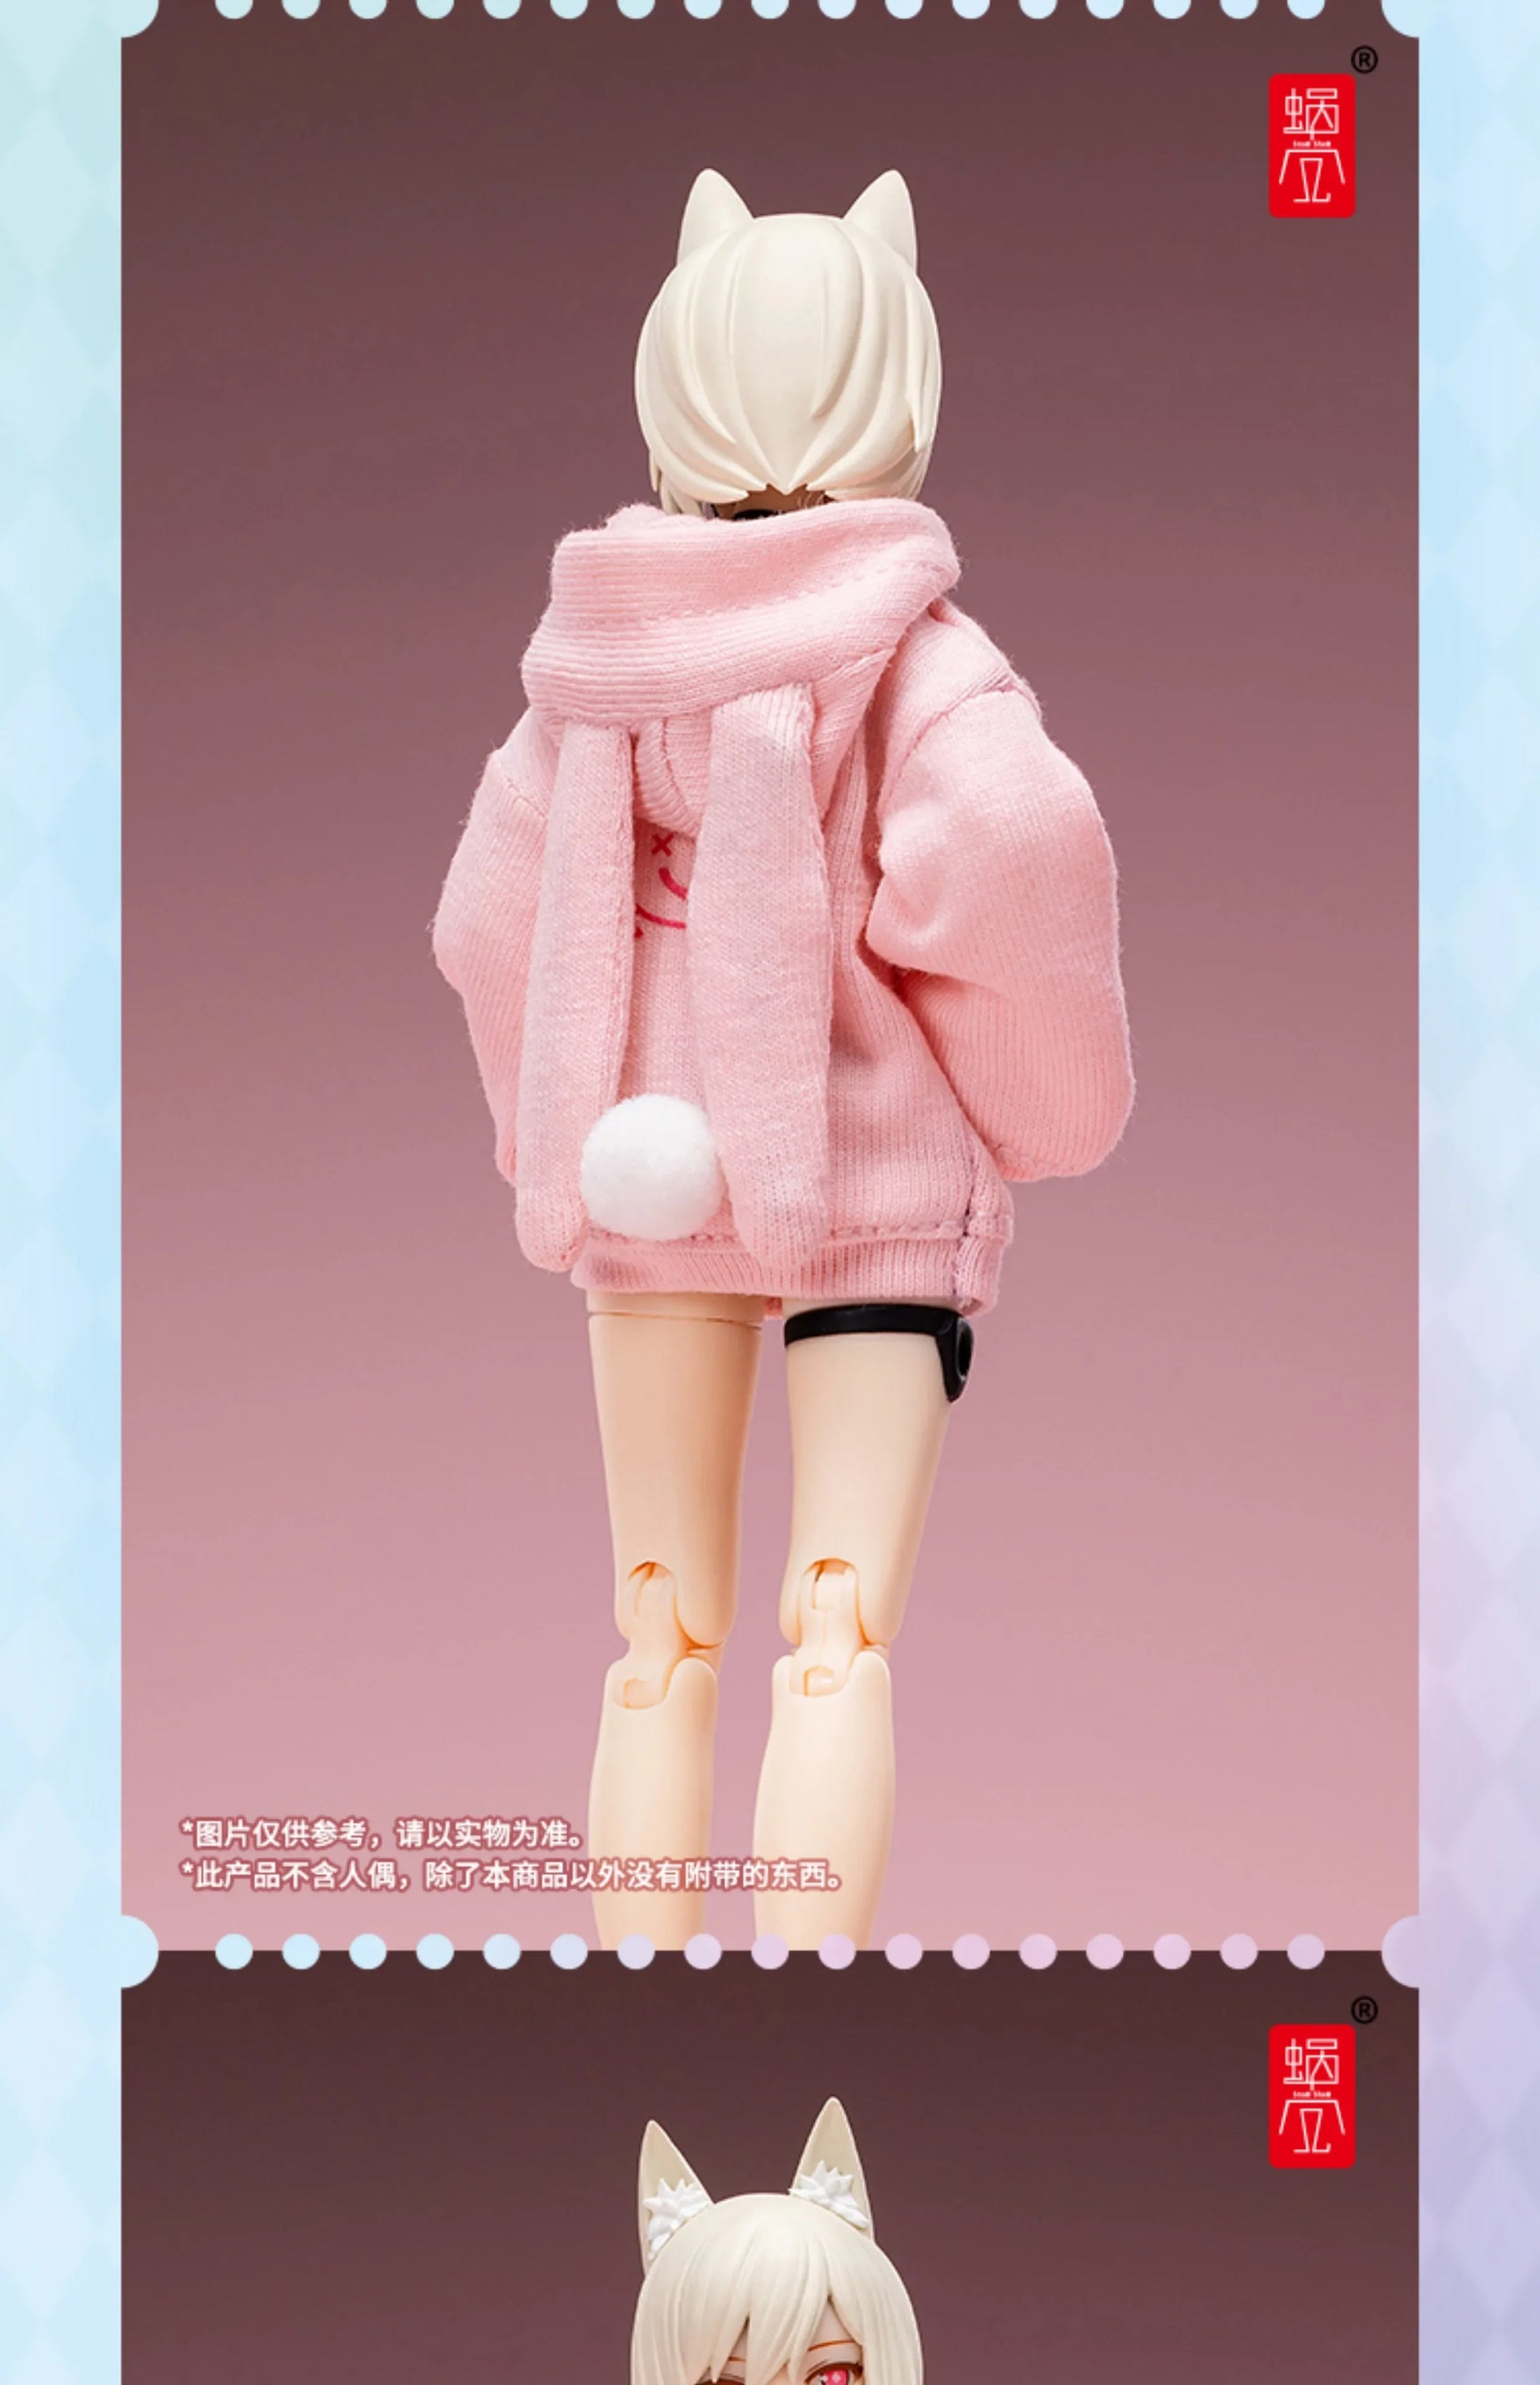 6" Anime Girl Action Figure Rabbit Ear Sweater With Bunny Slippers